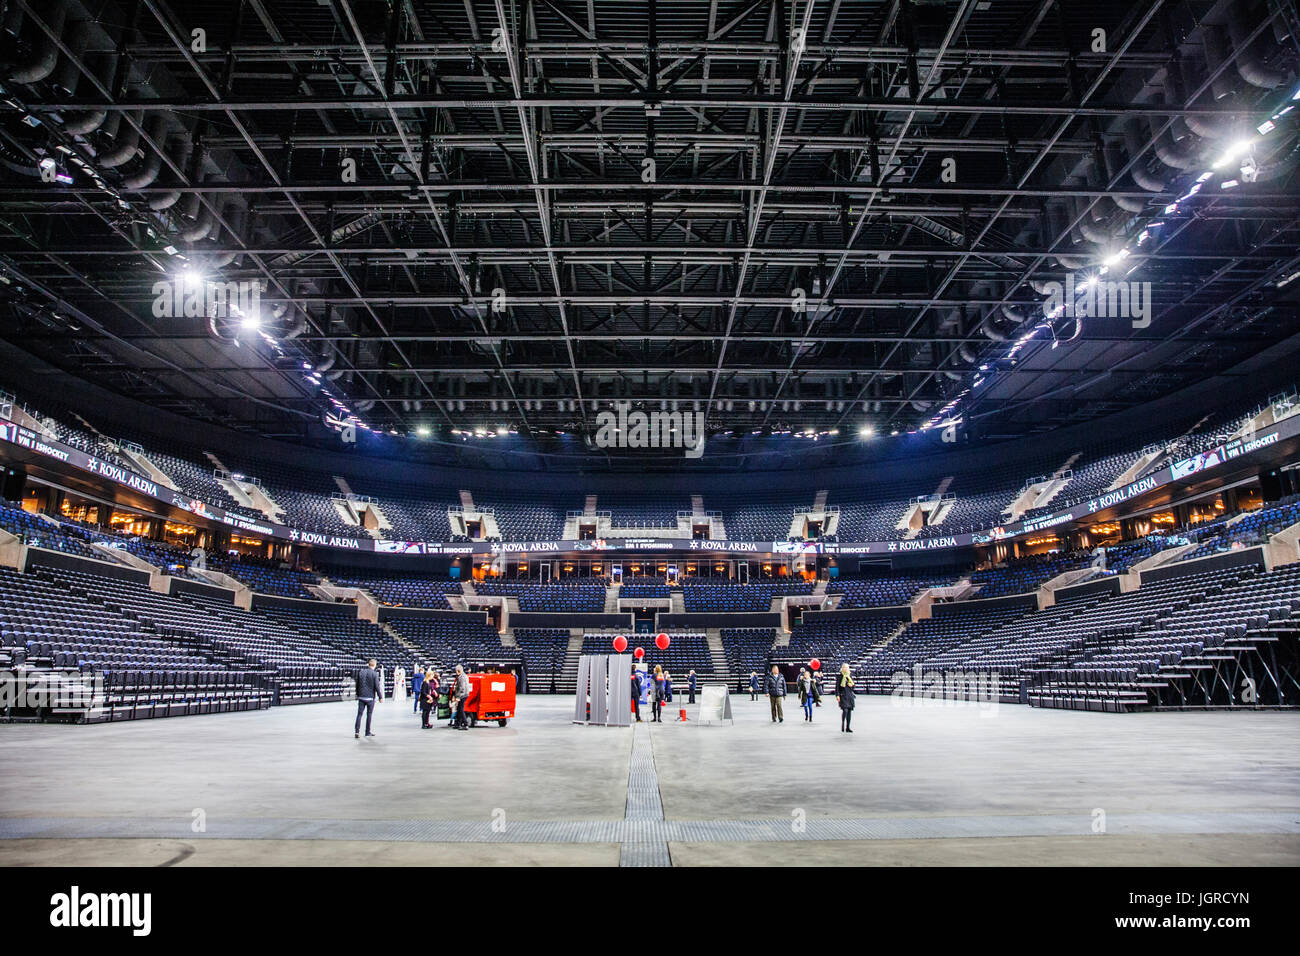 Inside the Royal Arena, which is an indoor cultural meeting place in  Copenhagen, Denmark. The Arena is known for its Nordic design and was  hosting events such as the Eurovision Song Contest